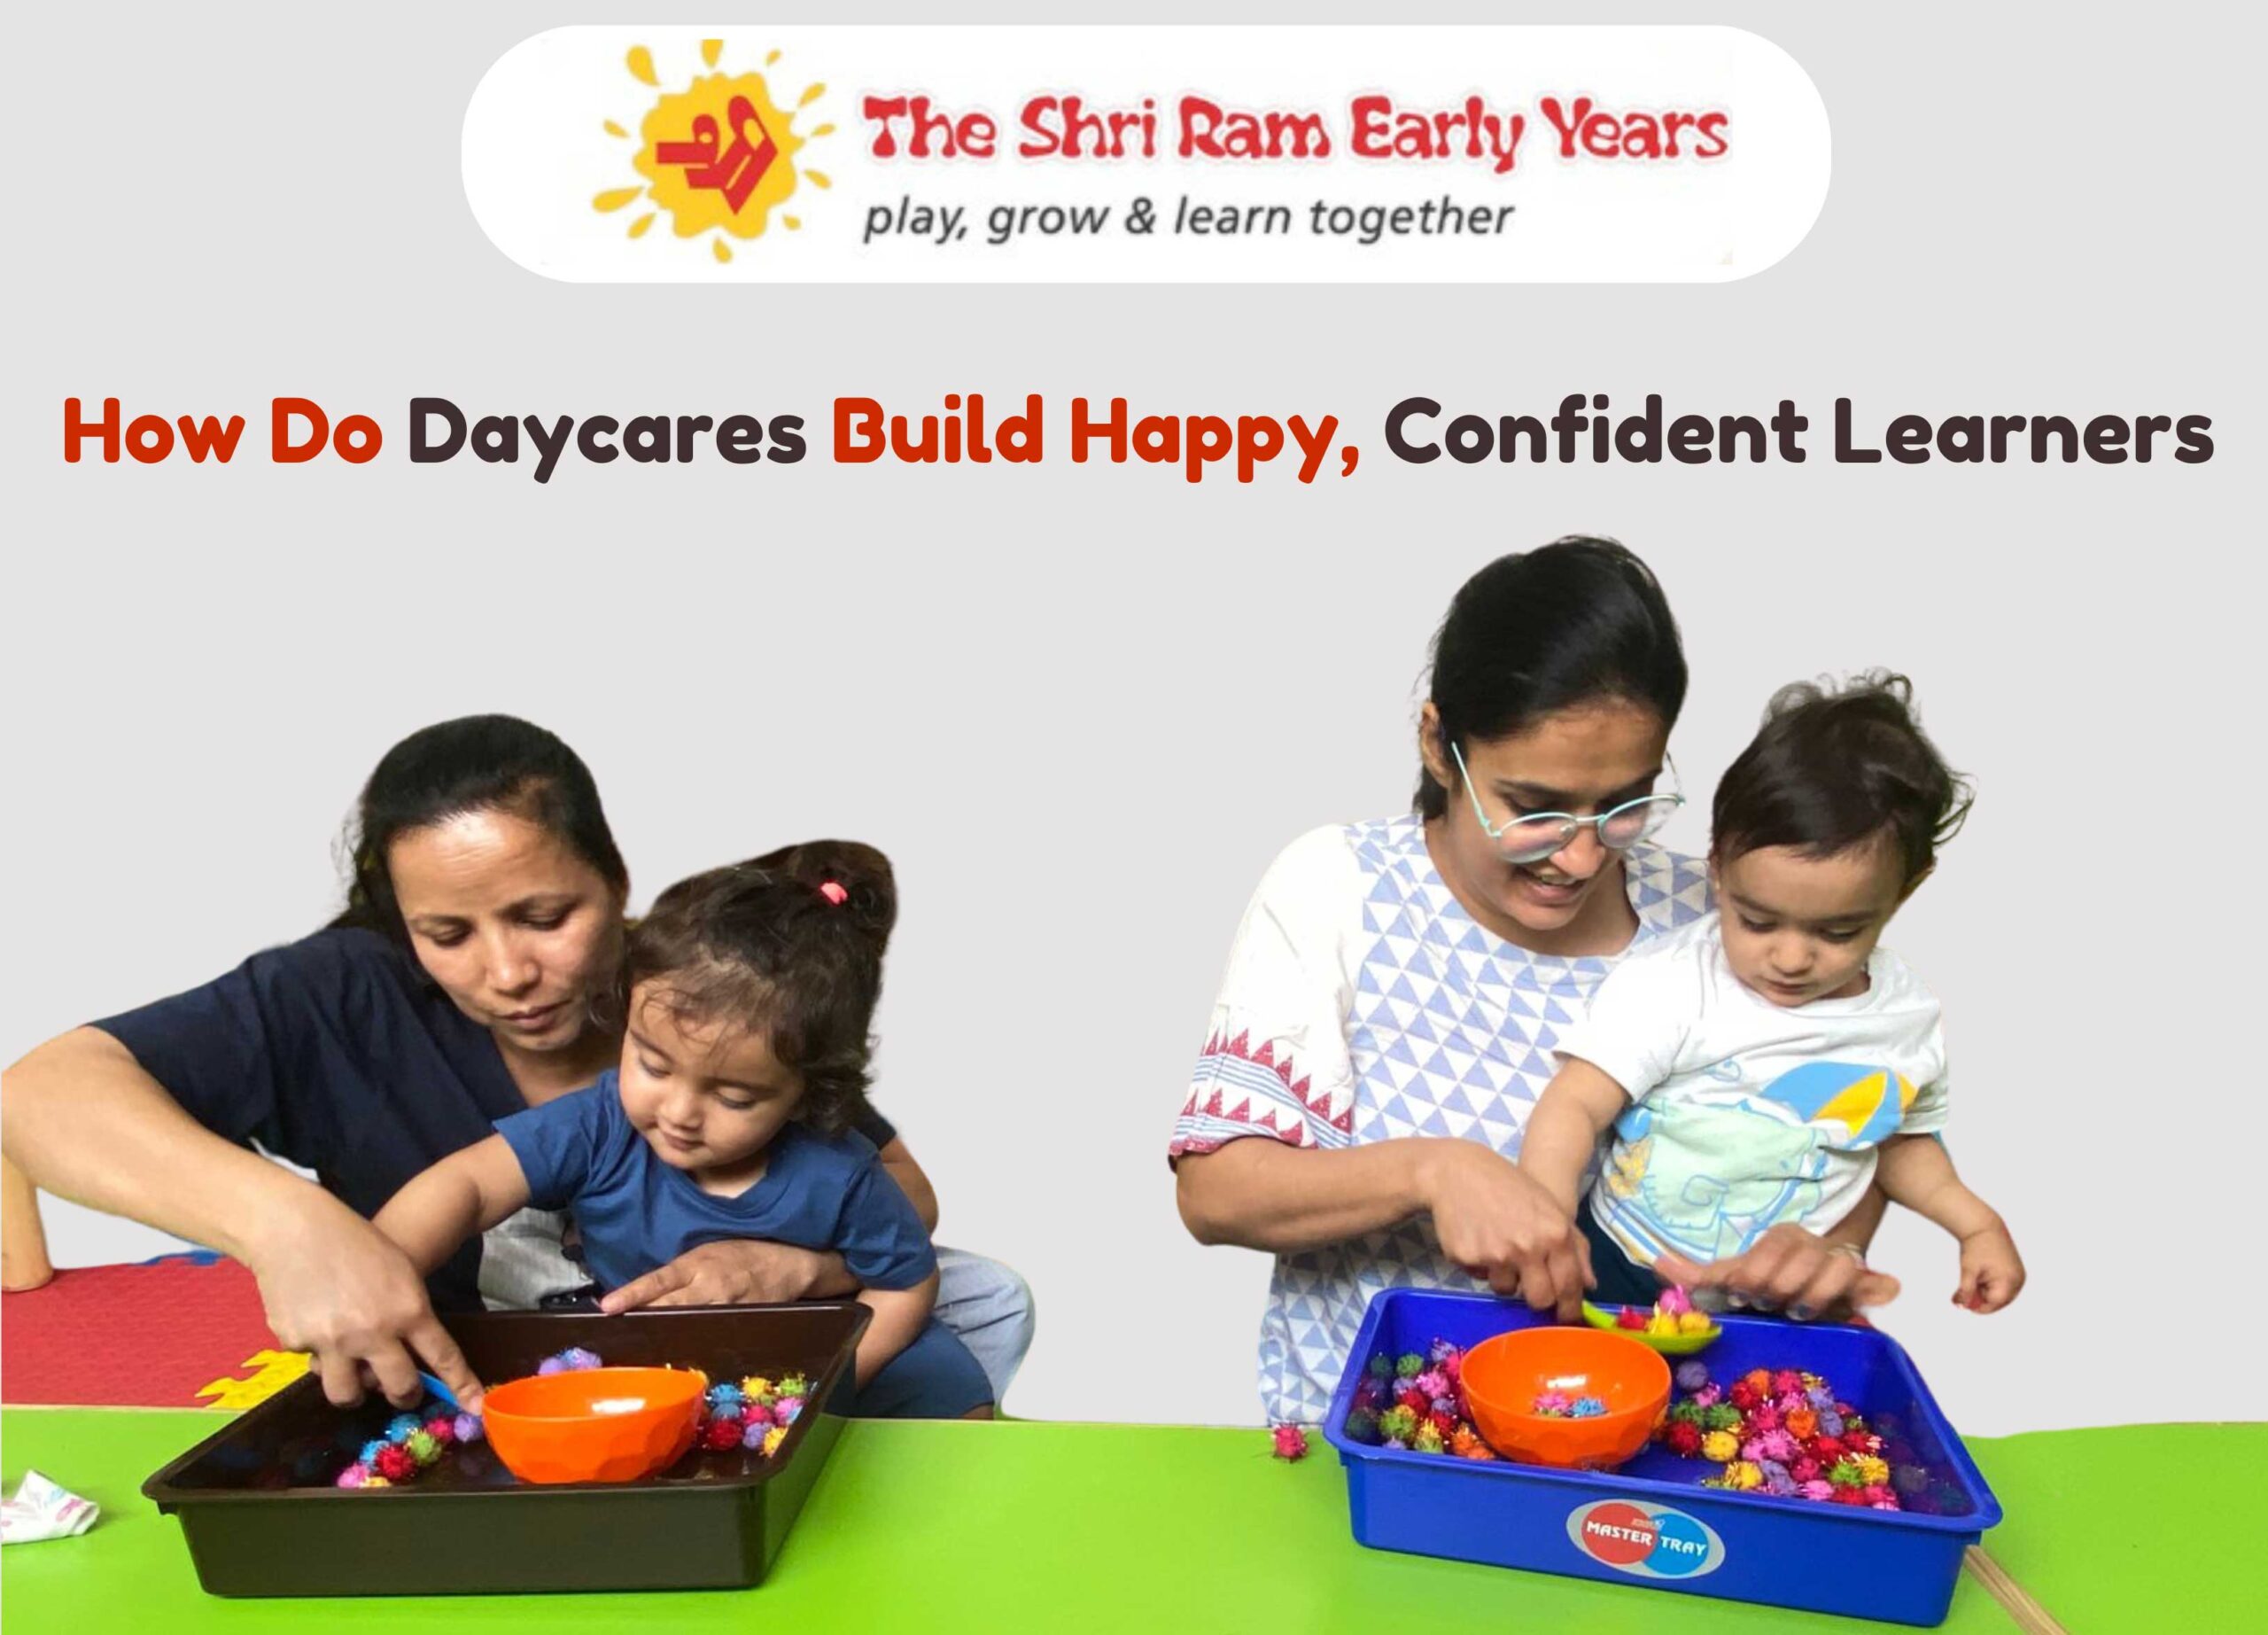 How Do Daycares Build Happy, Confident Learners